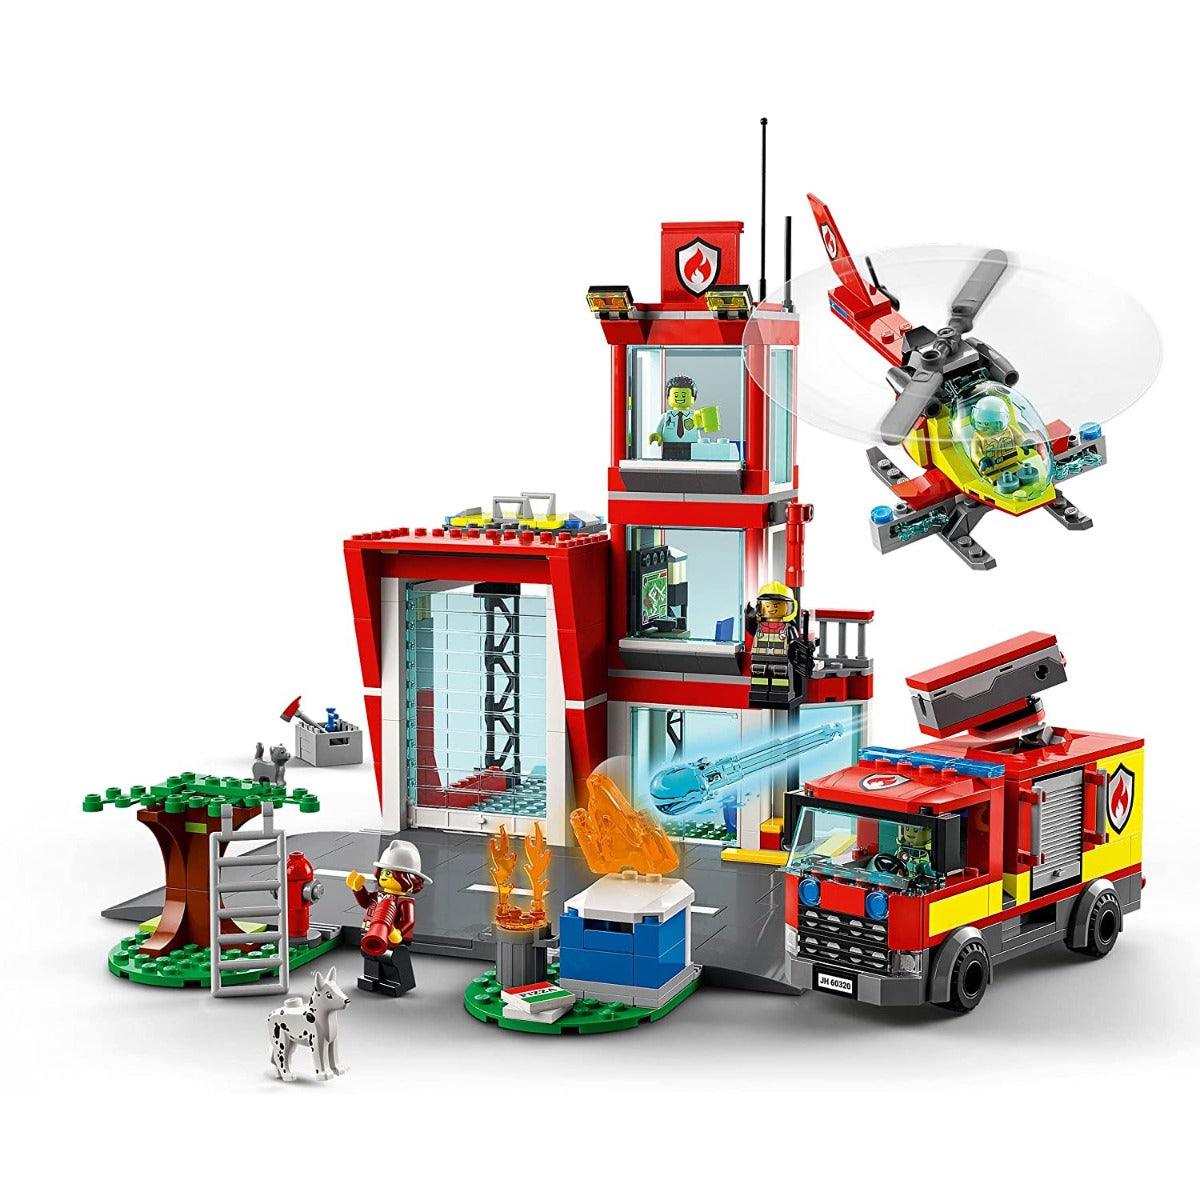 LEGO City Fire Station Building Kit for Ages 6+